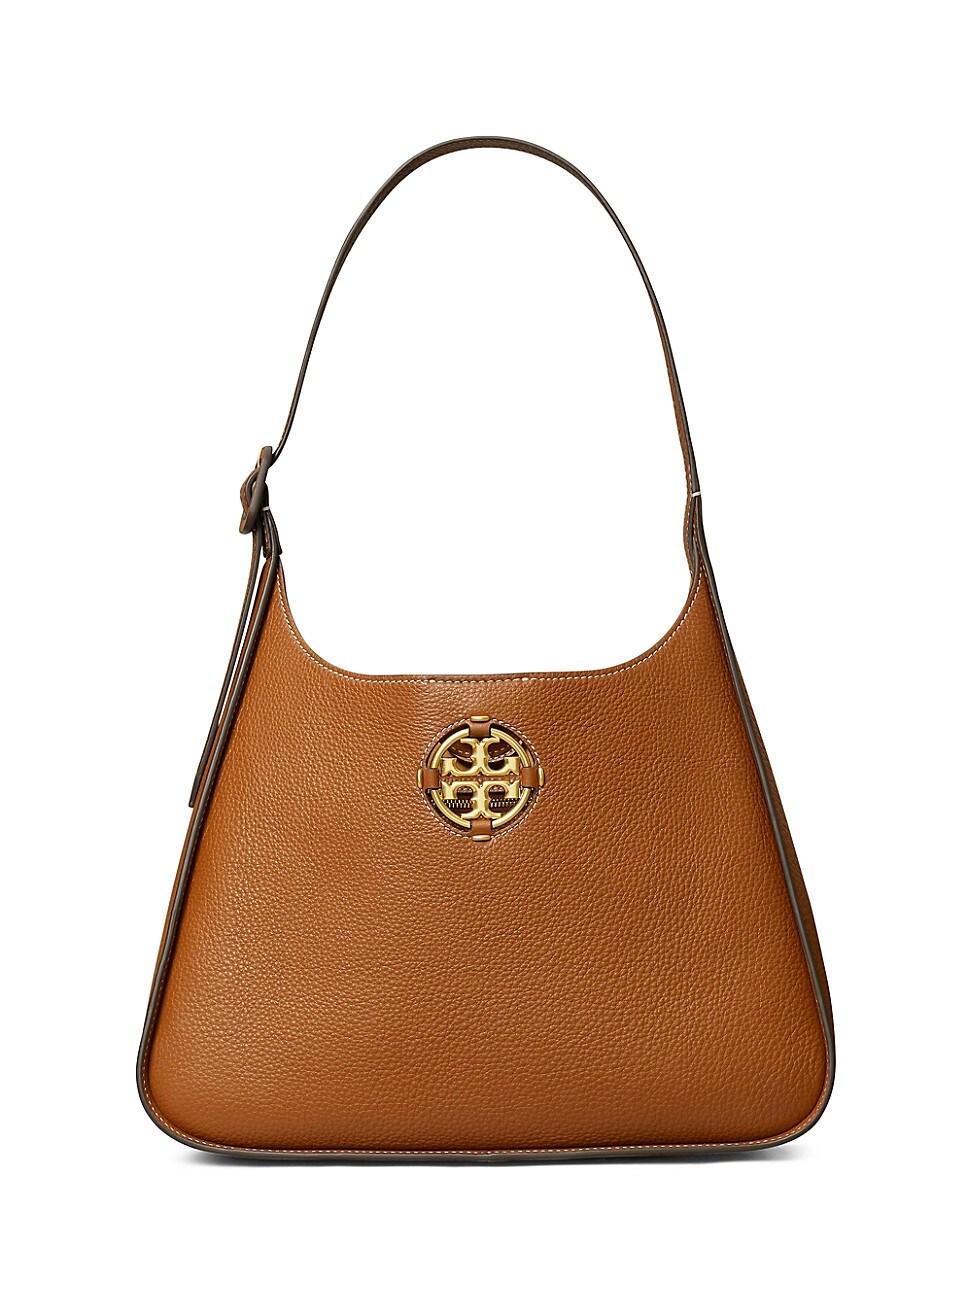 Tory Burch Miller Leather Hobo Bag in Brown - Lyst